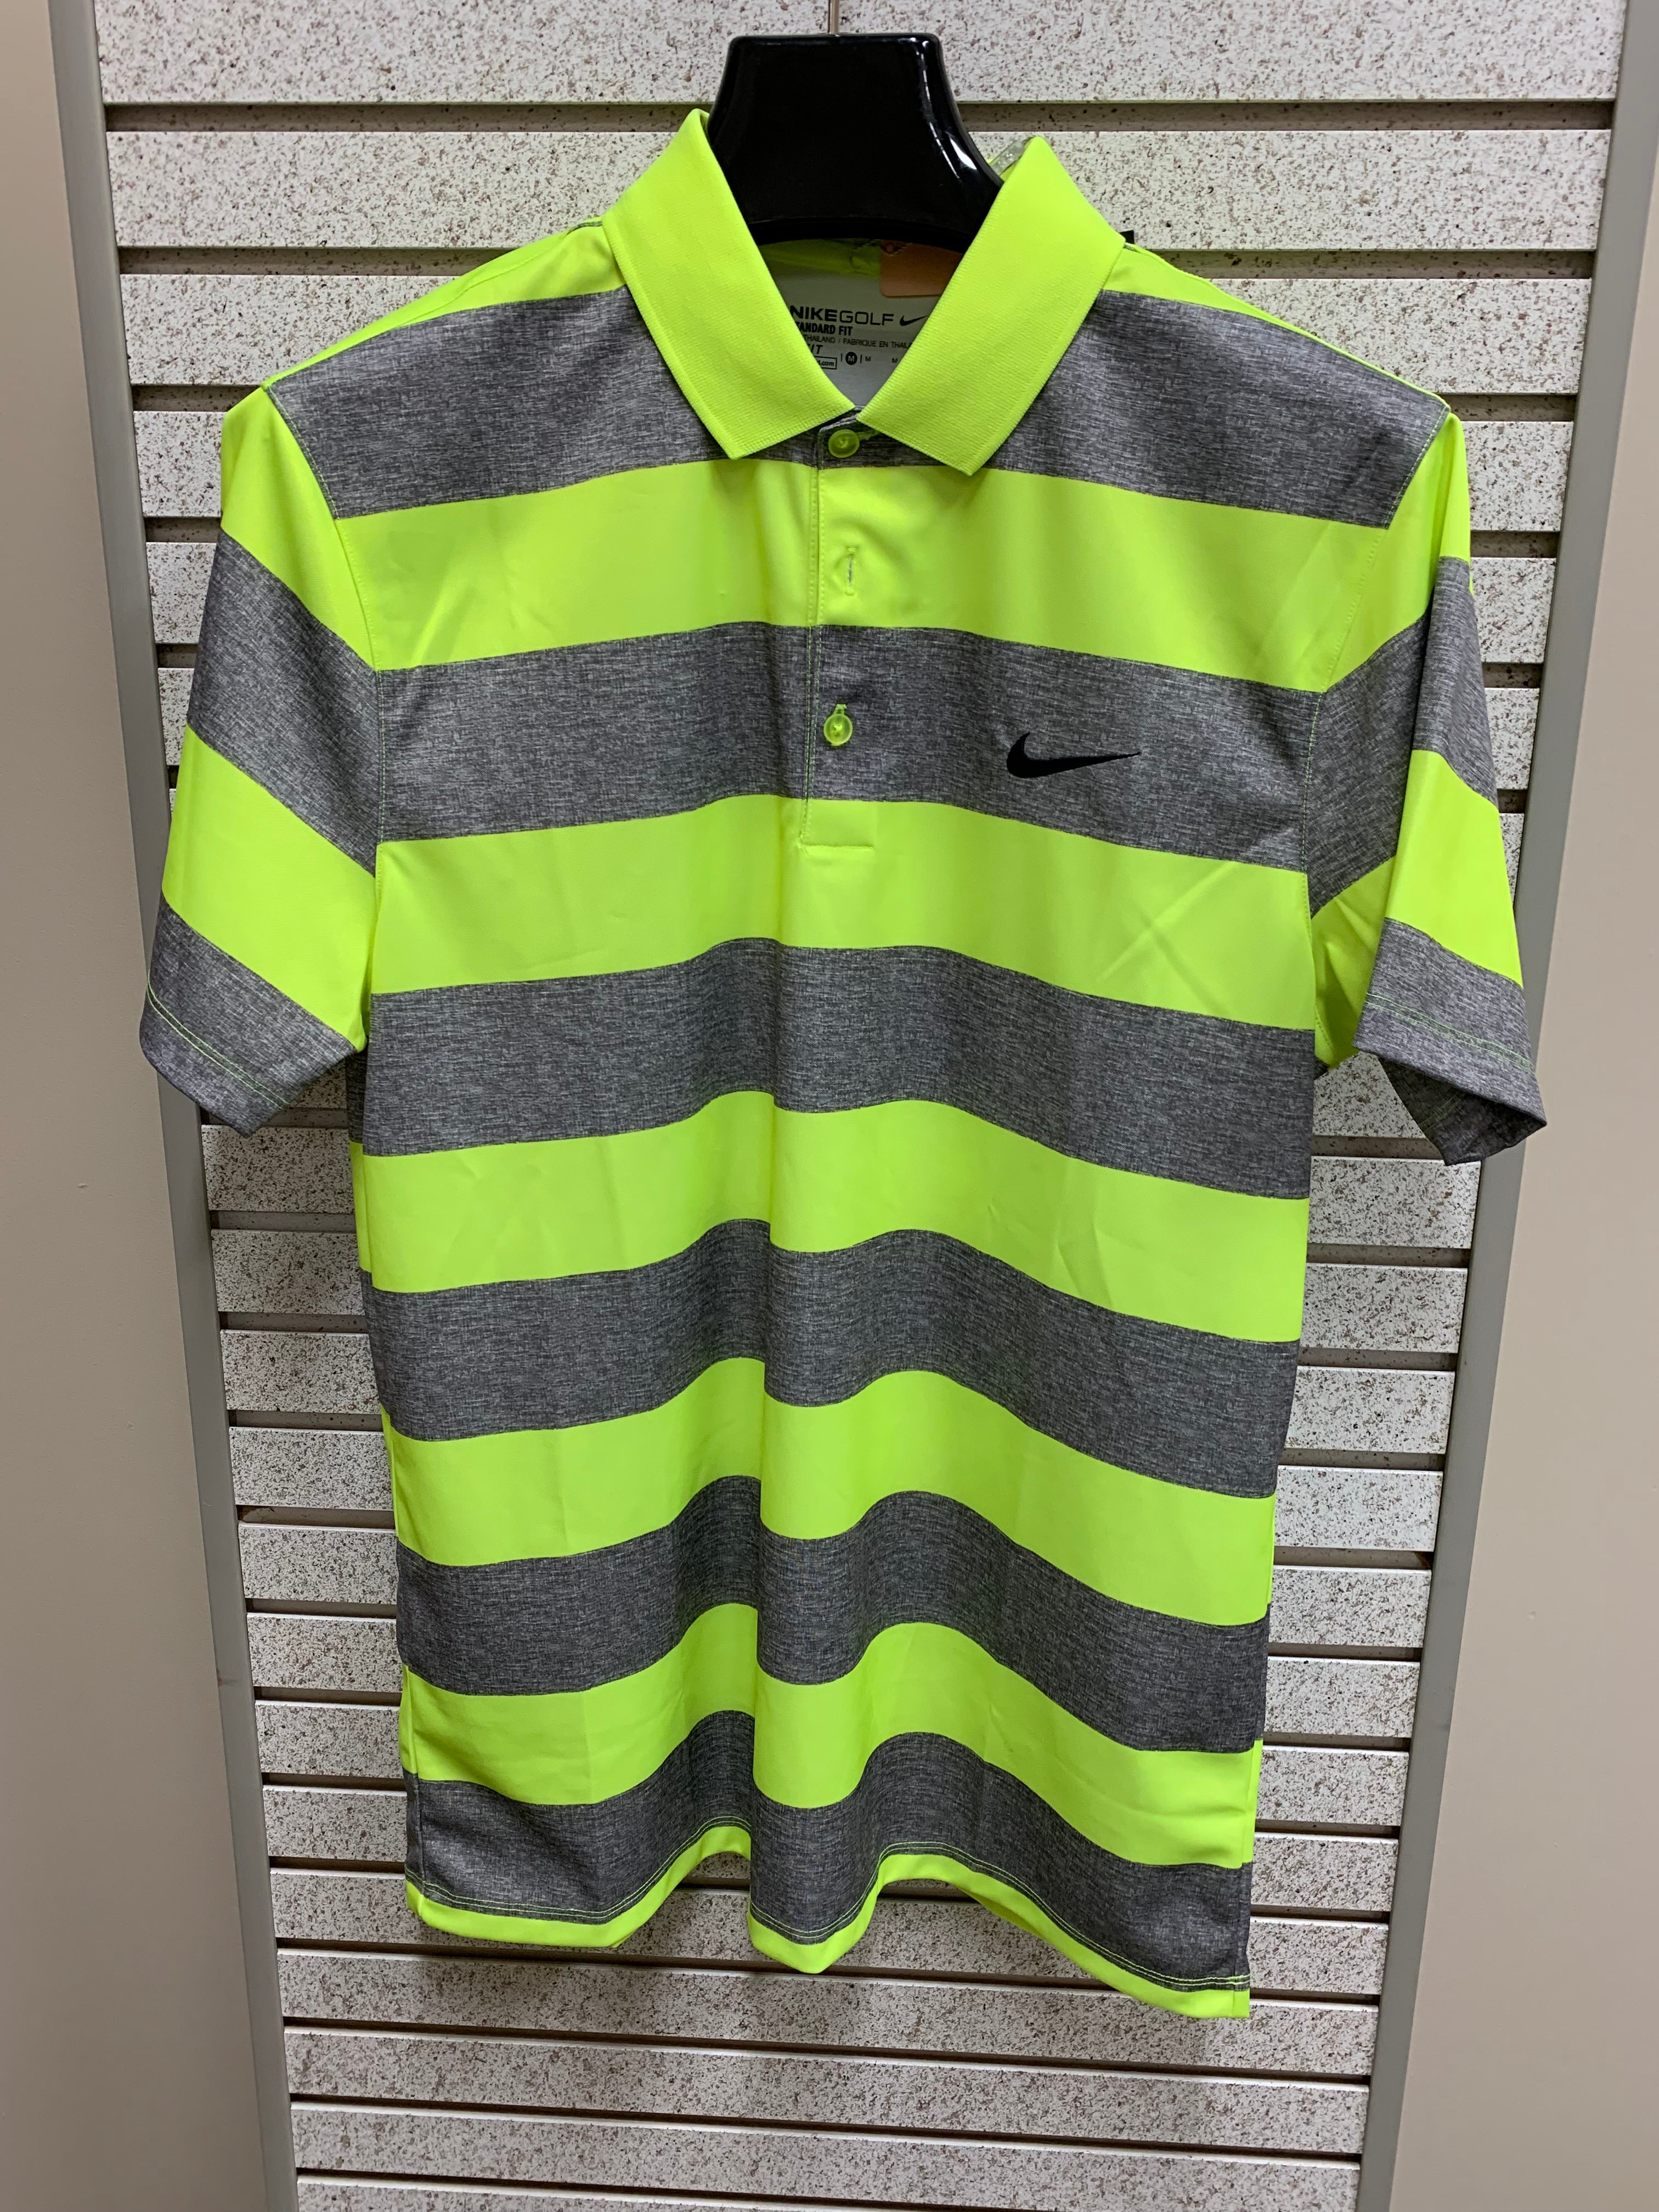 Men's Nike Dry Fit / Stay Cool Golf Shirt